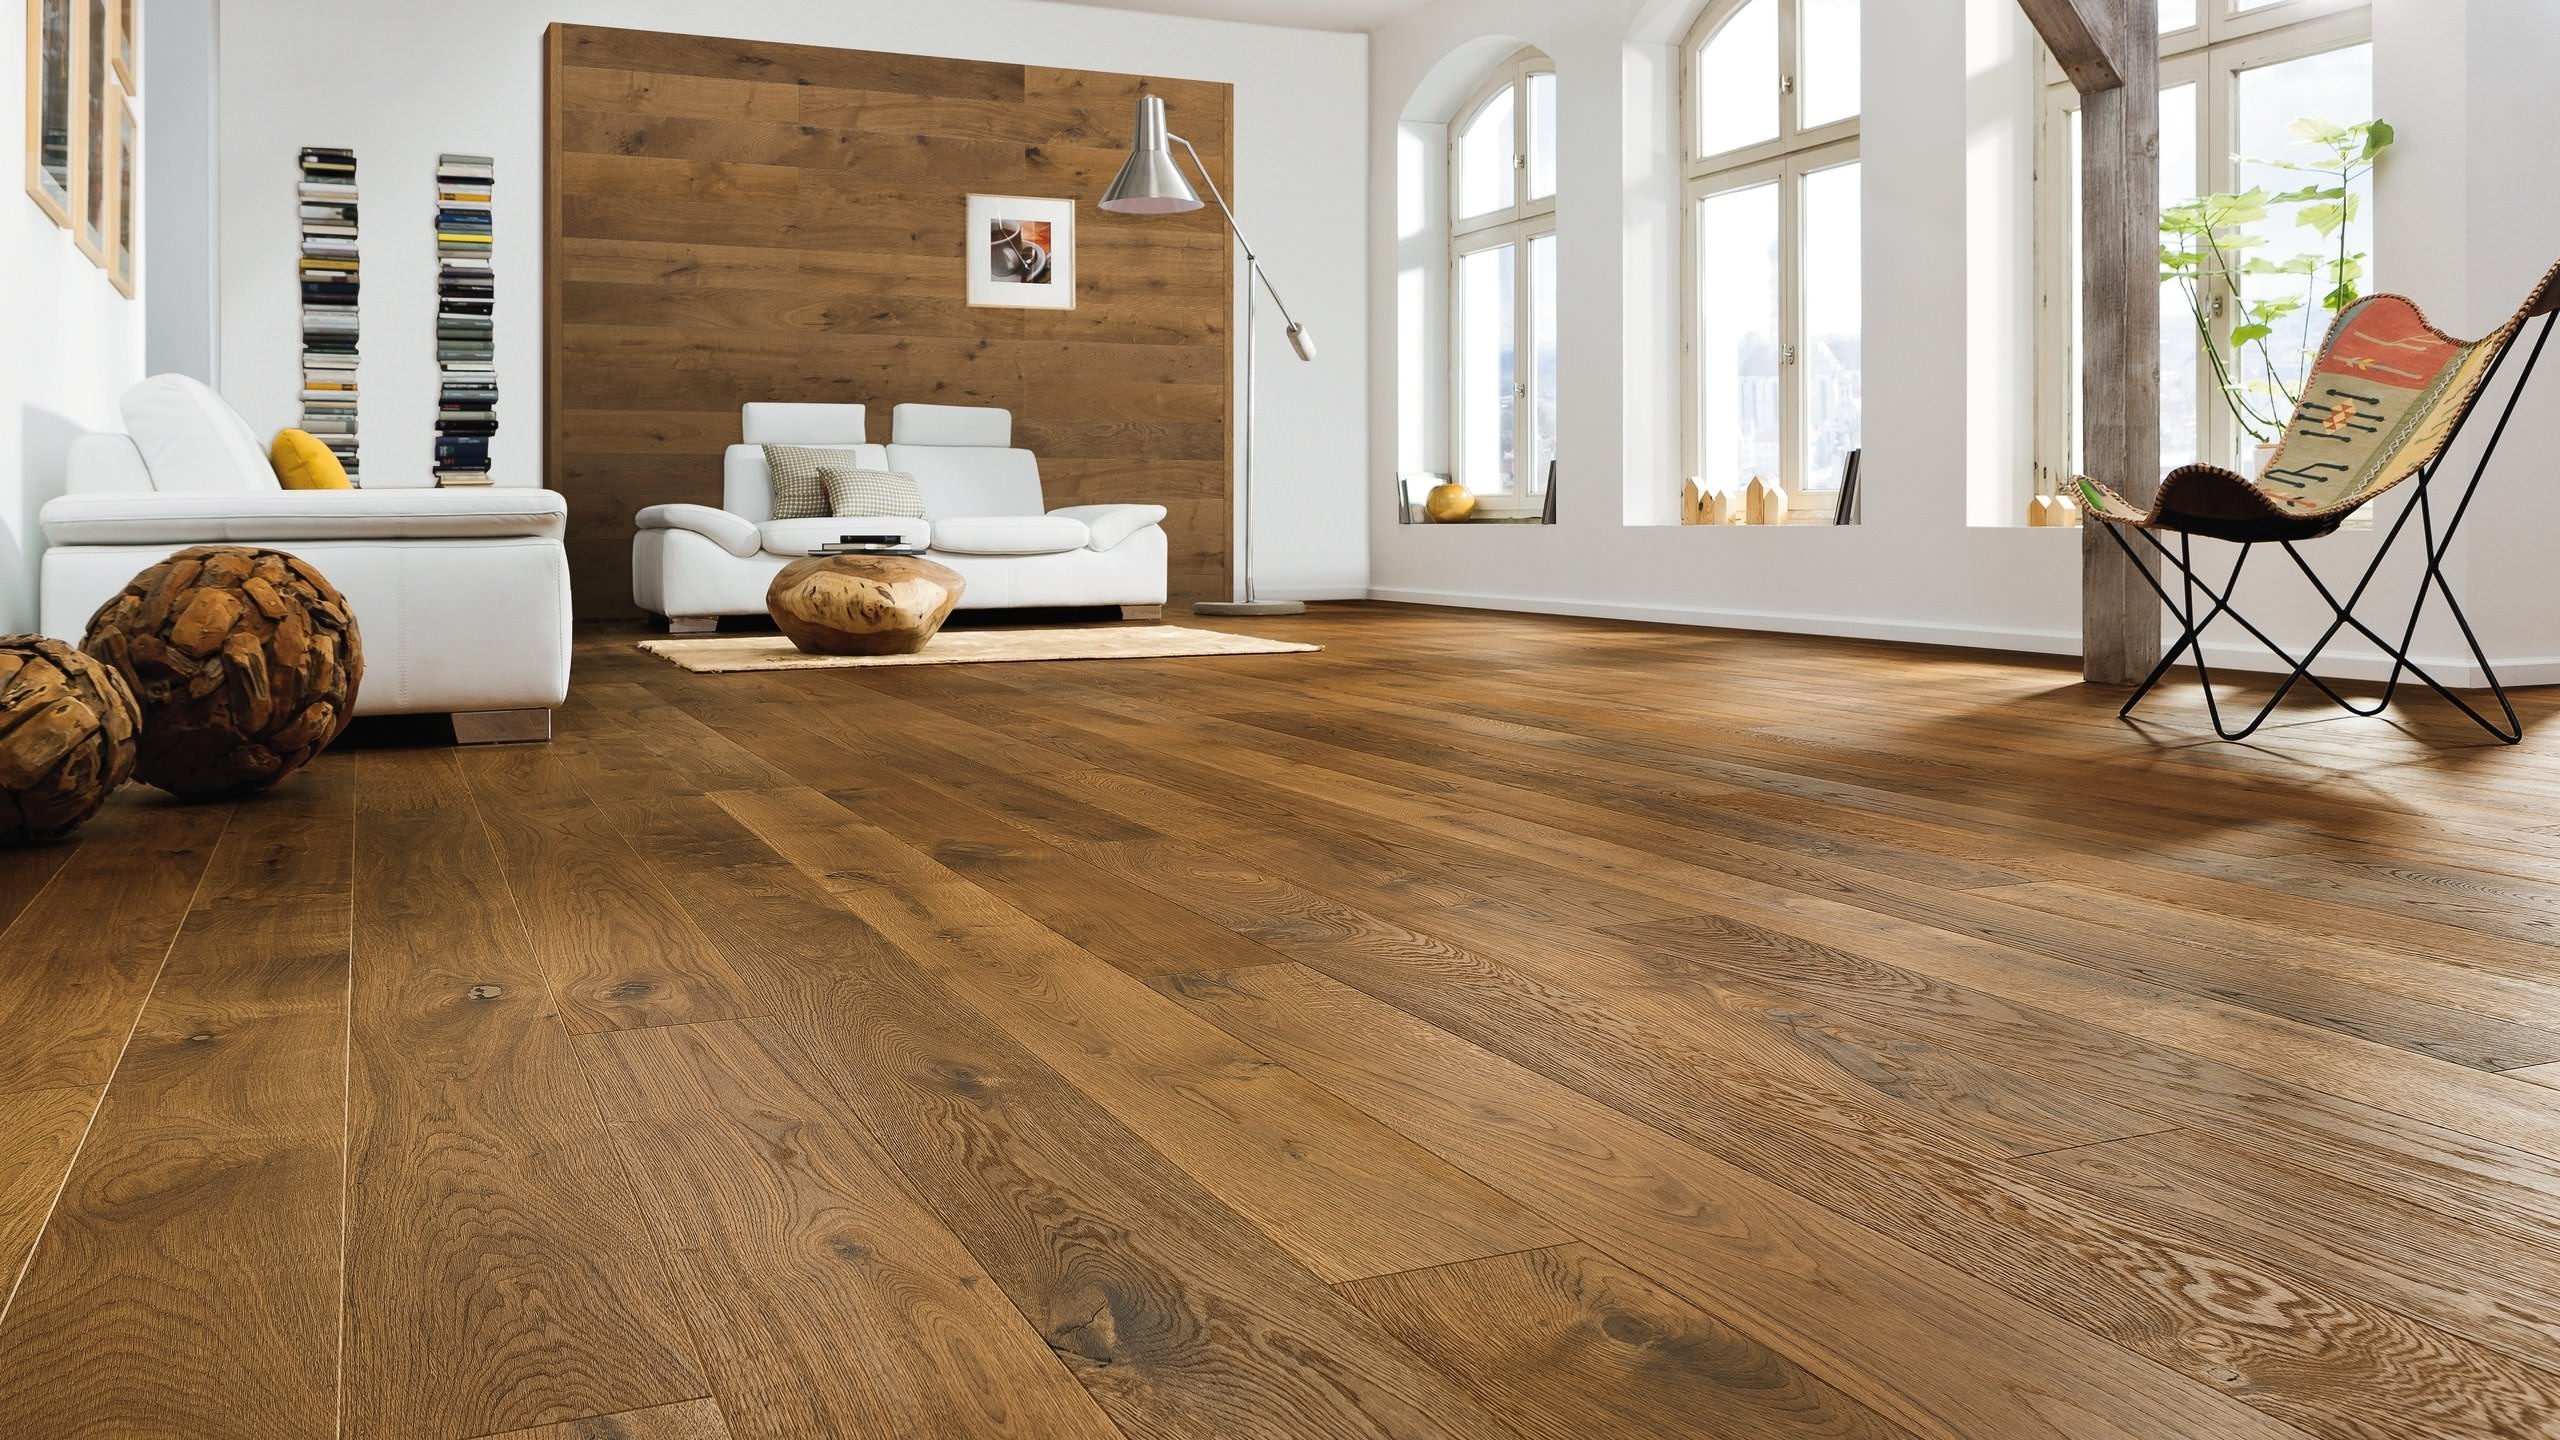 HARO PARQUET 4000 Plank 1-Strip 180 4V Smoked Oak Sauvage brushed naturaLin plus Top Connect